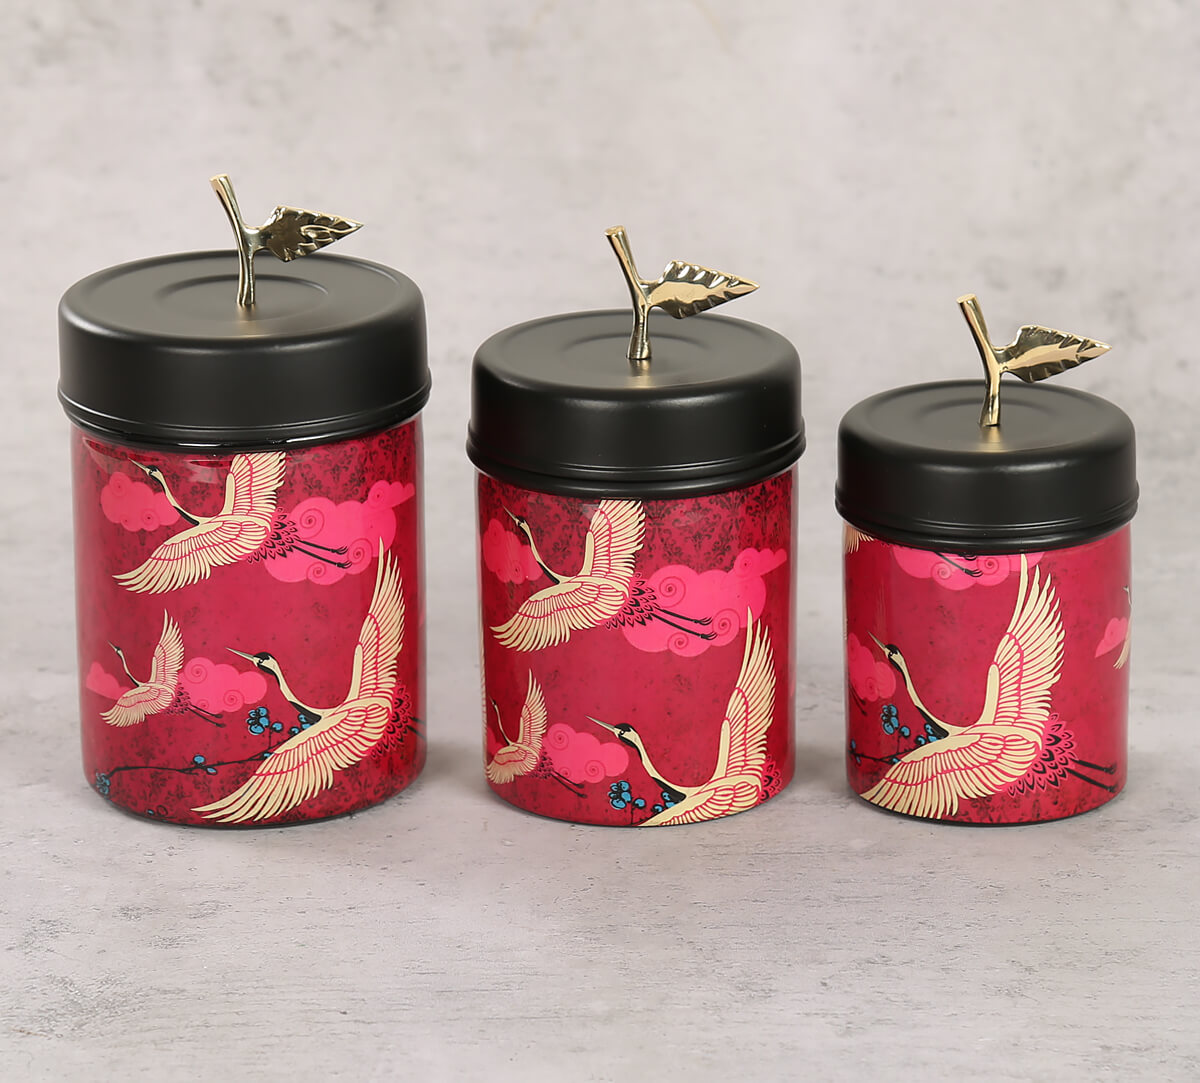 Legend of the Cranes Steel Container Set of 3